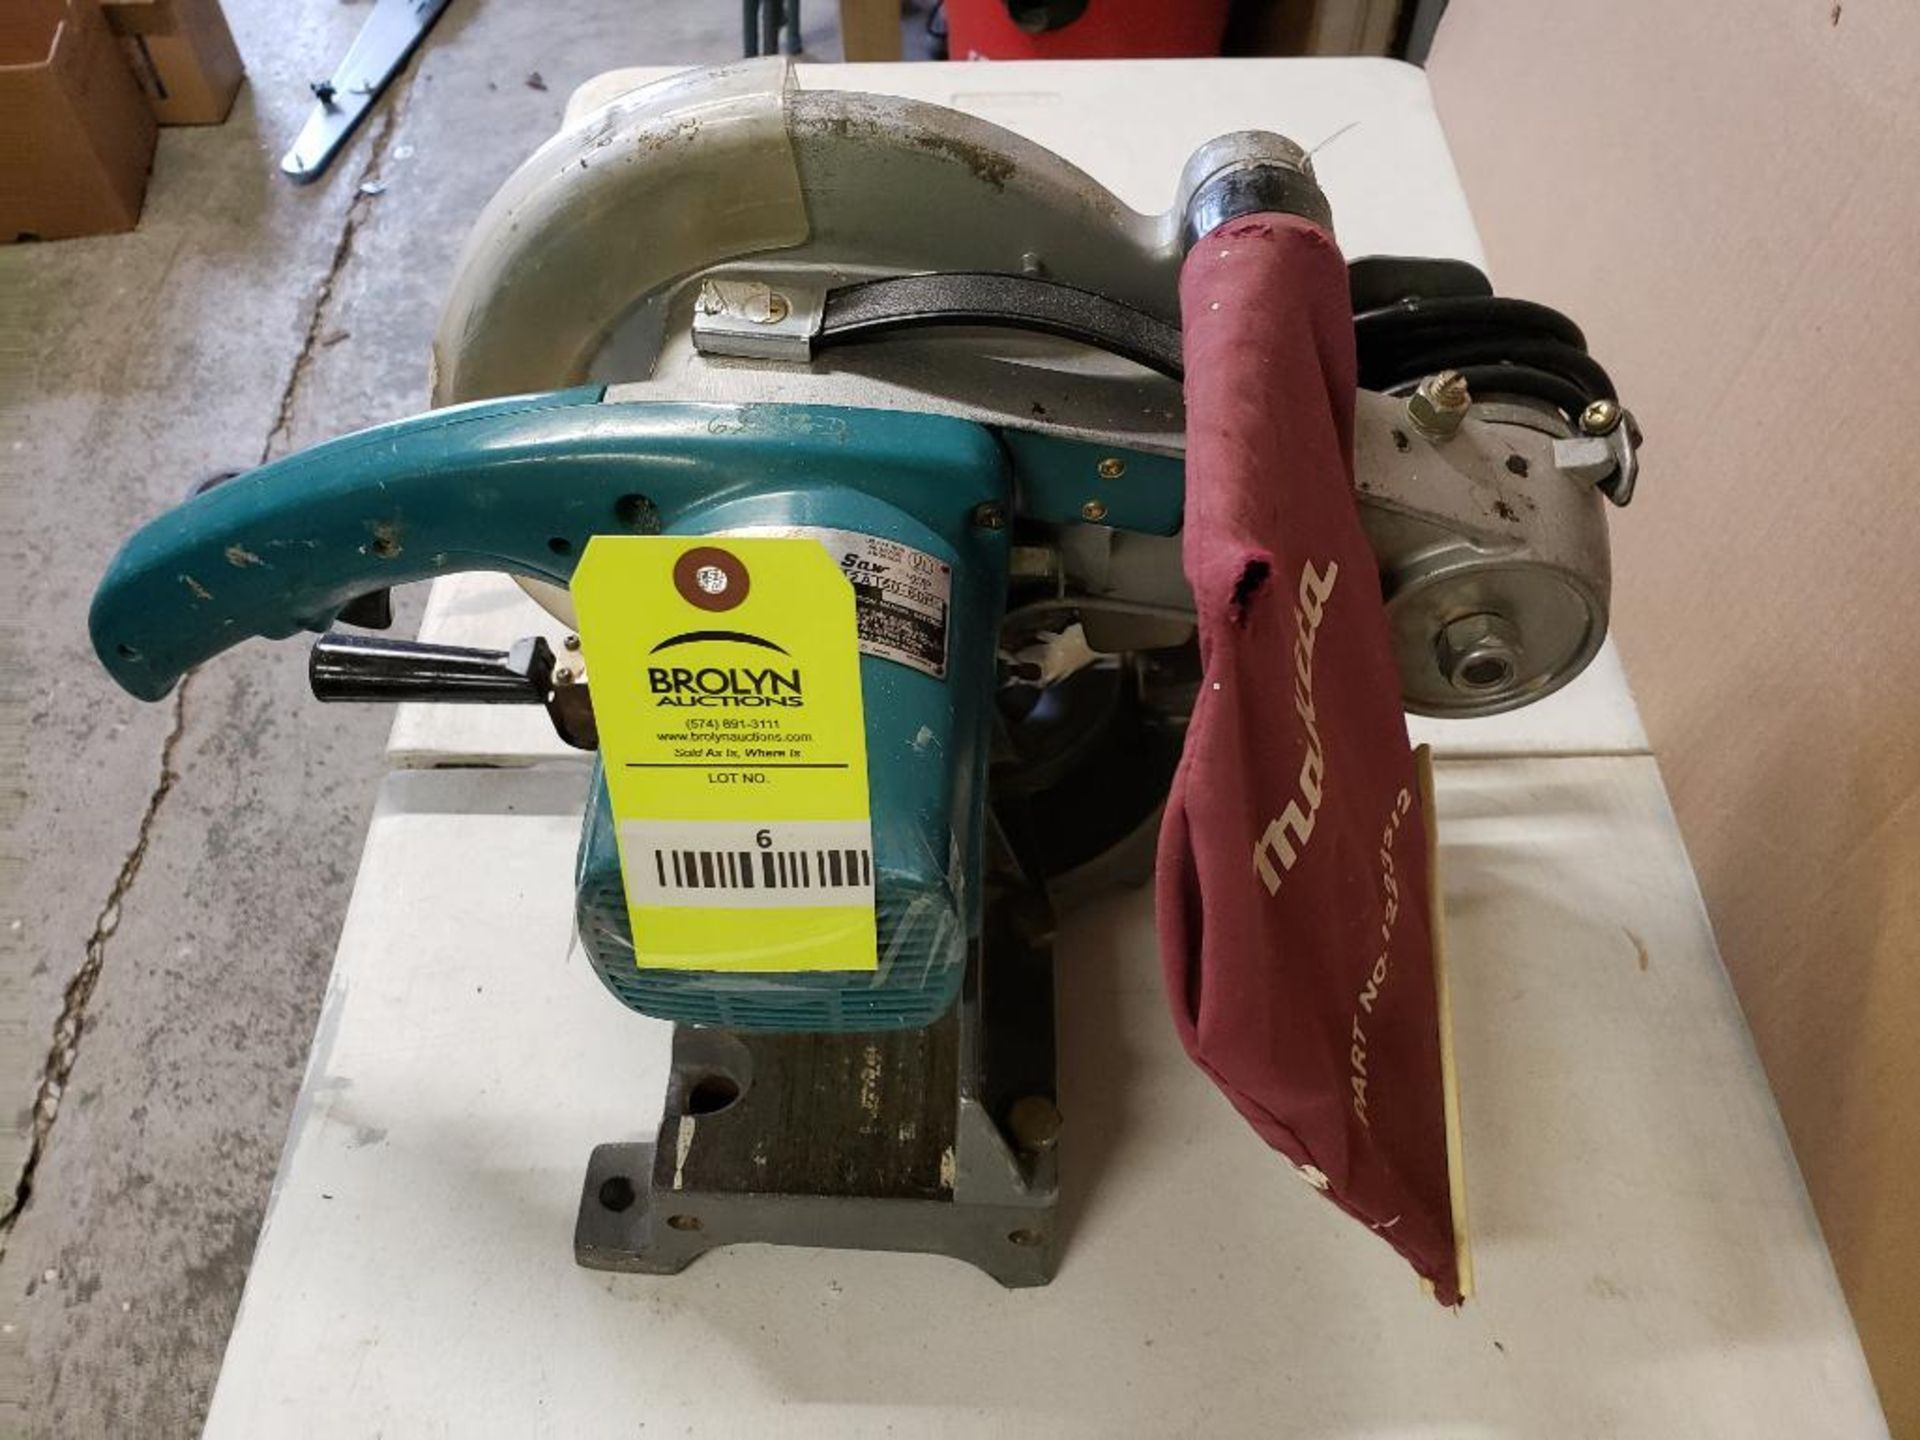 Makita compound miter saw. 10in blade. Model LS1020. 115v single phase. - Image 10 of 10